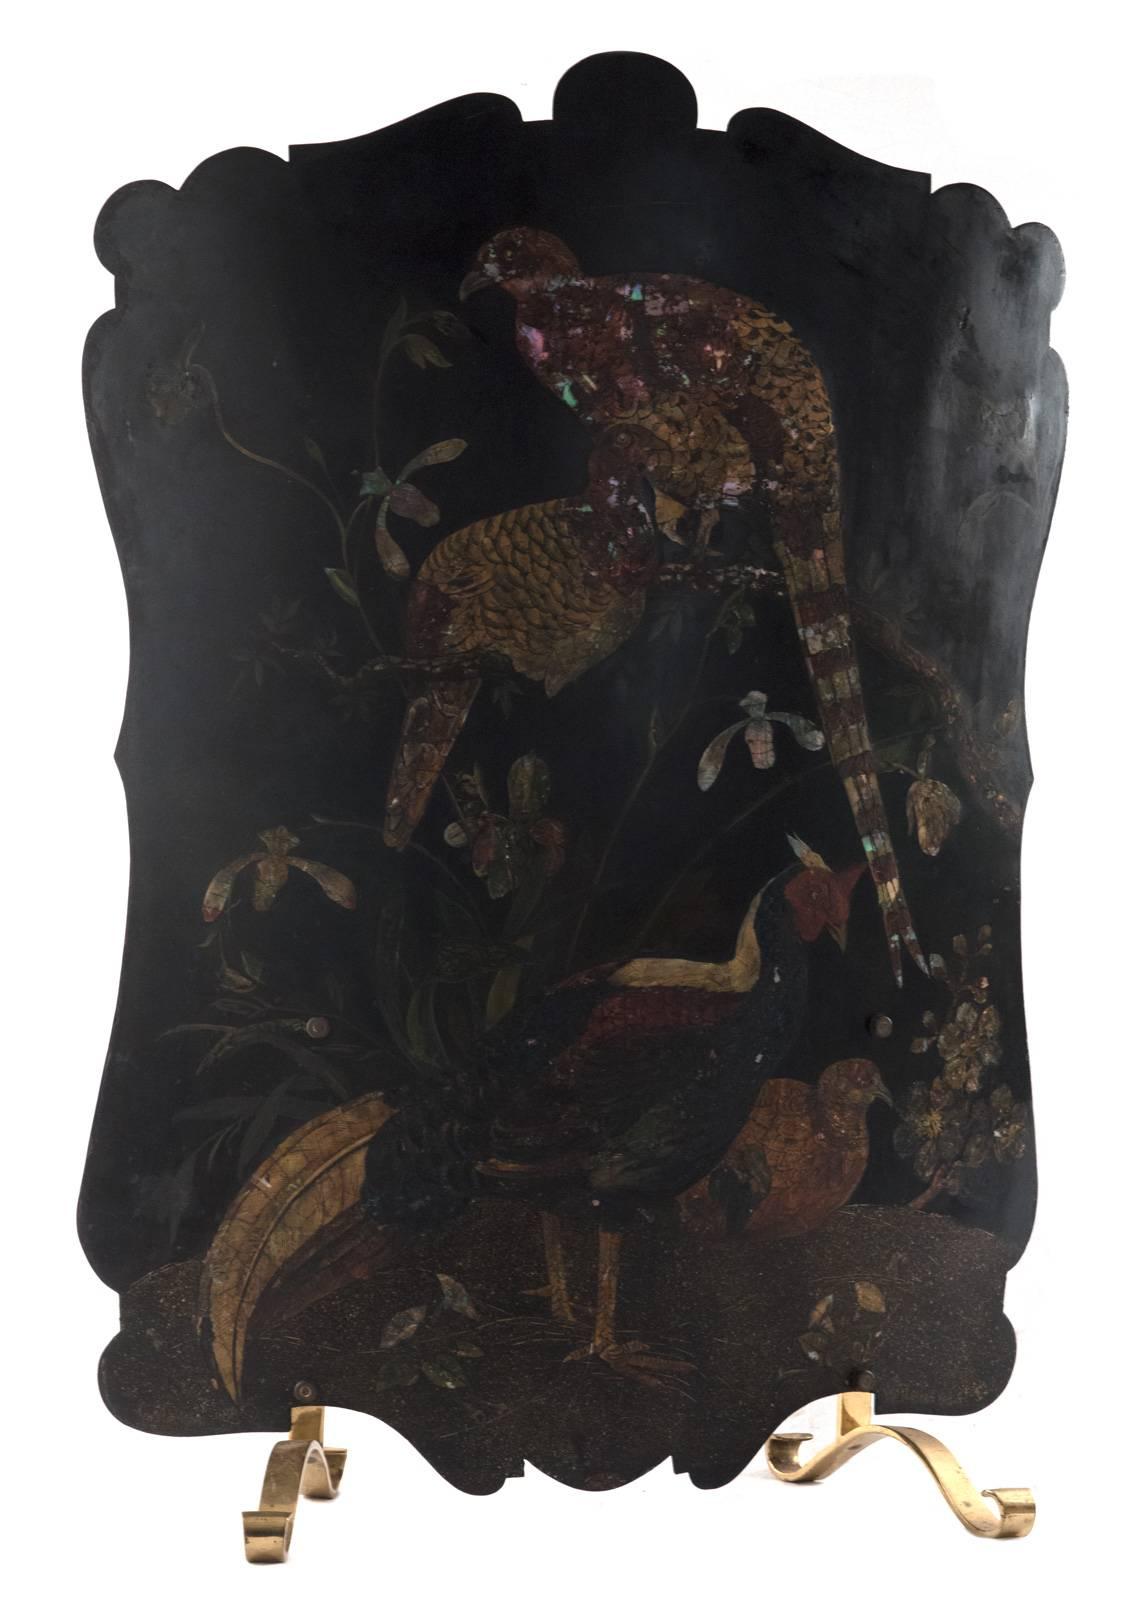 Painted and decorated with mother-of-pearl, this large screen depicts three exotic pheasants resting on a flowering tree. The curved metal screen rests on two S-scrolled brass feet.